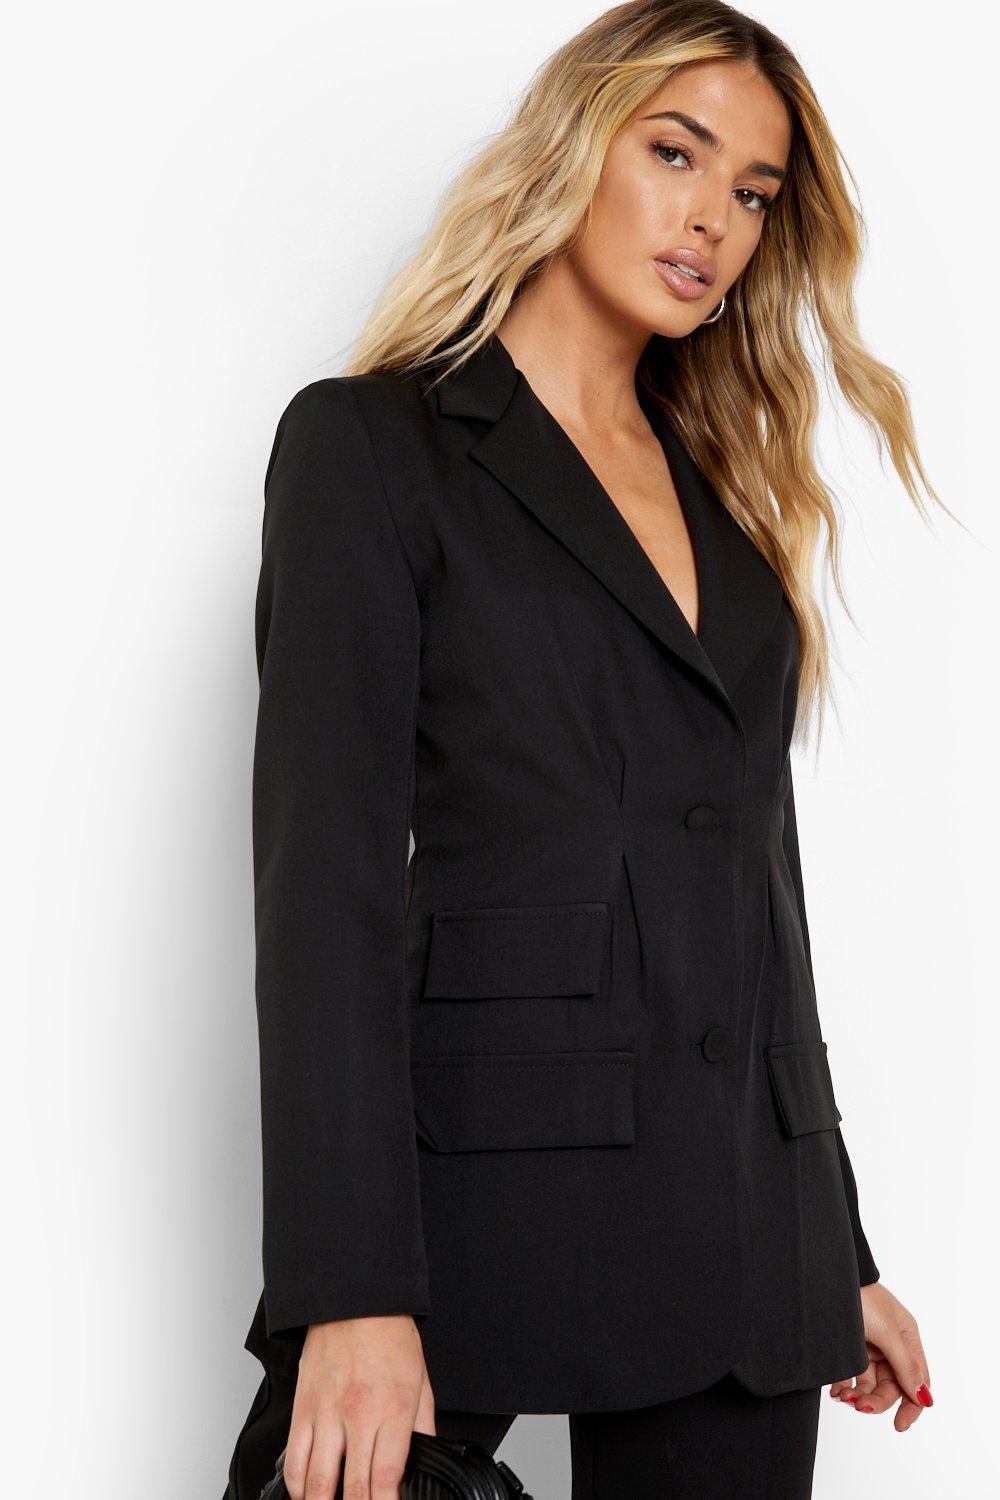 Women's Tailored Contour Fitted Blazer